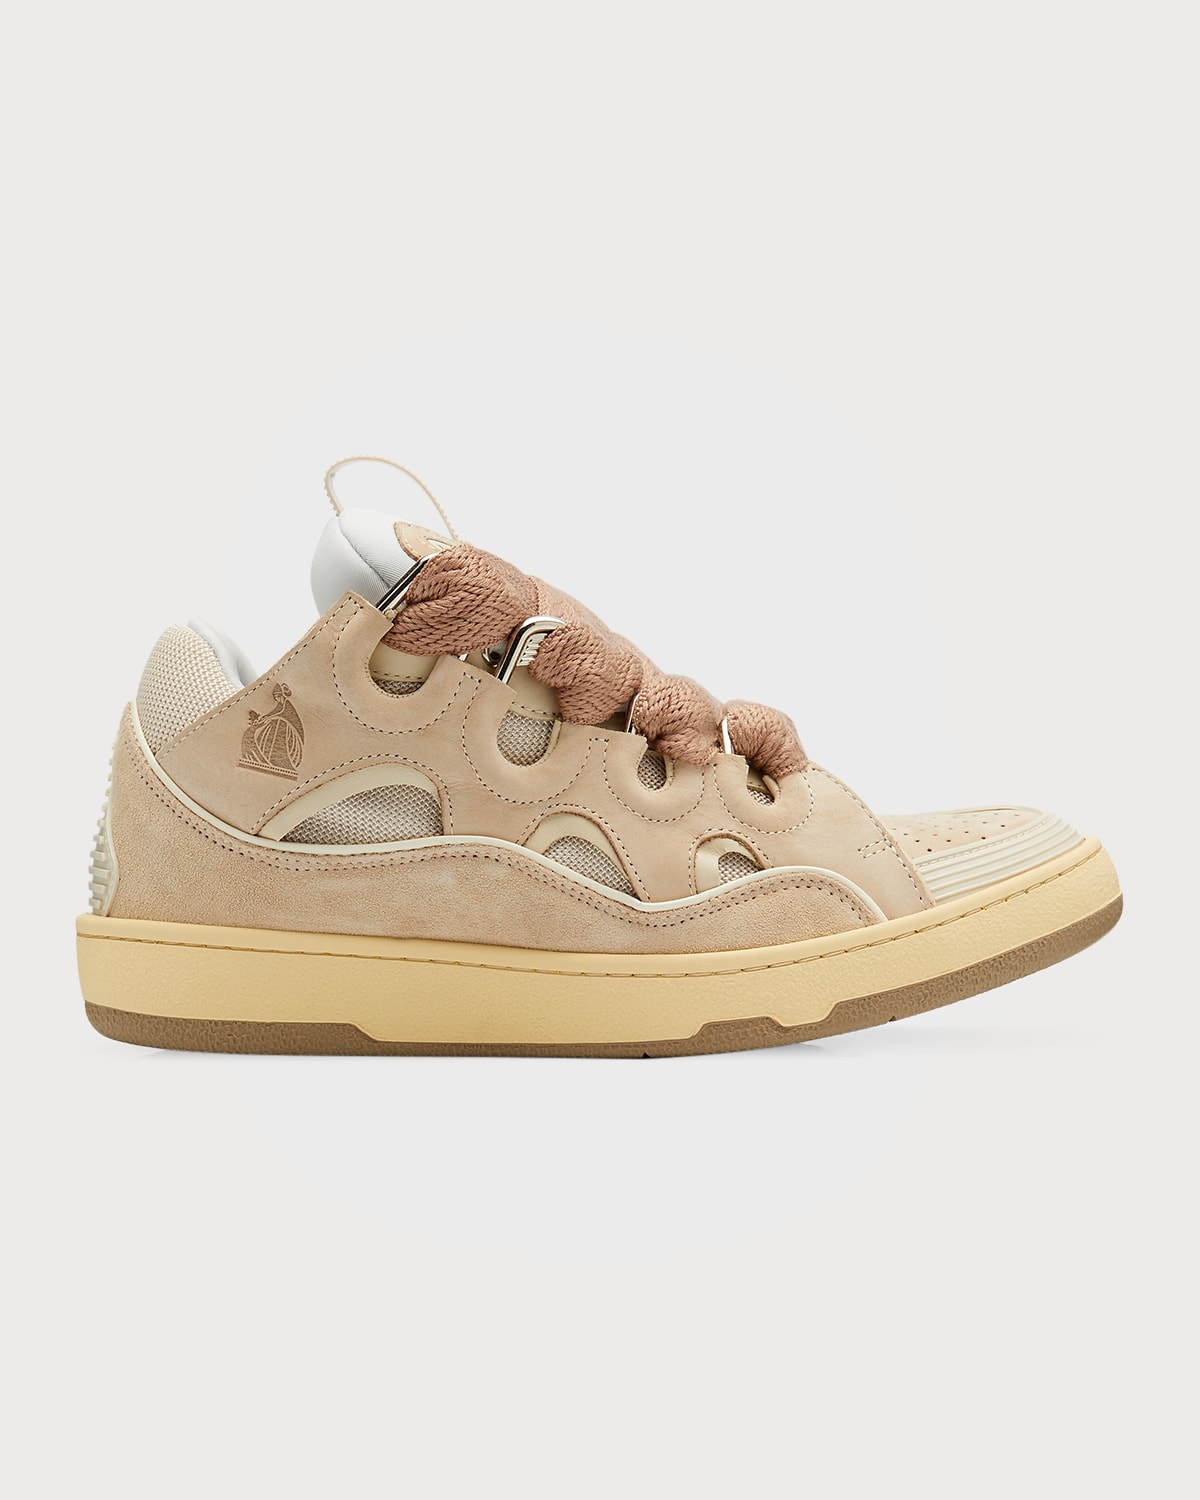 Lanvin Men's Tonal Textile And Leather Low-top Curb Sneakers In Nude